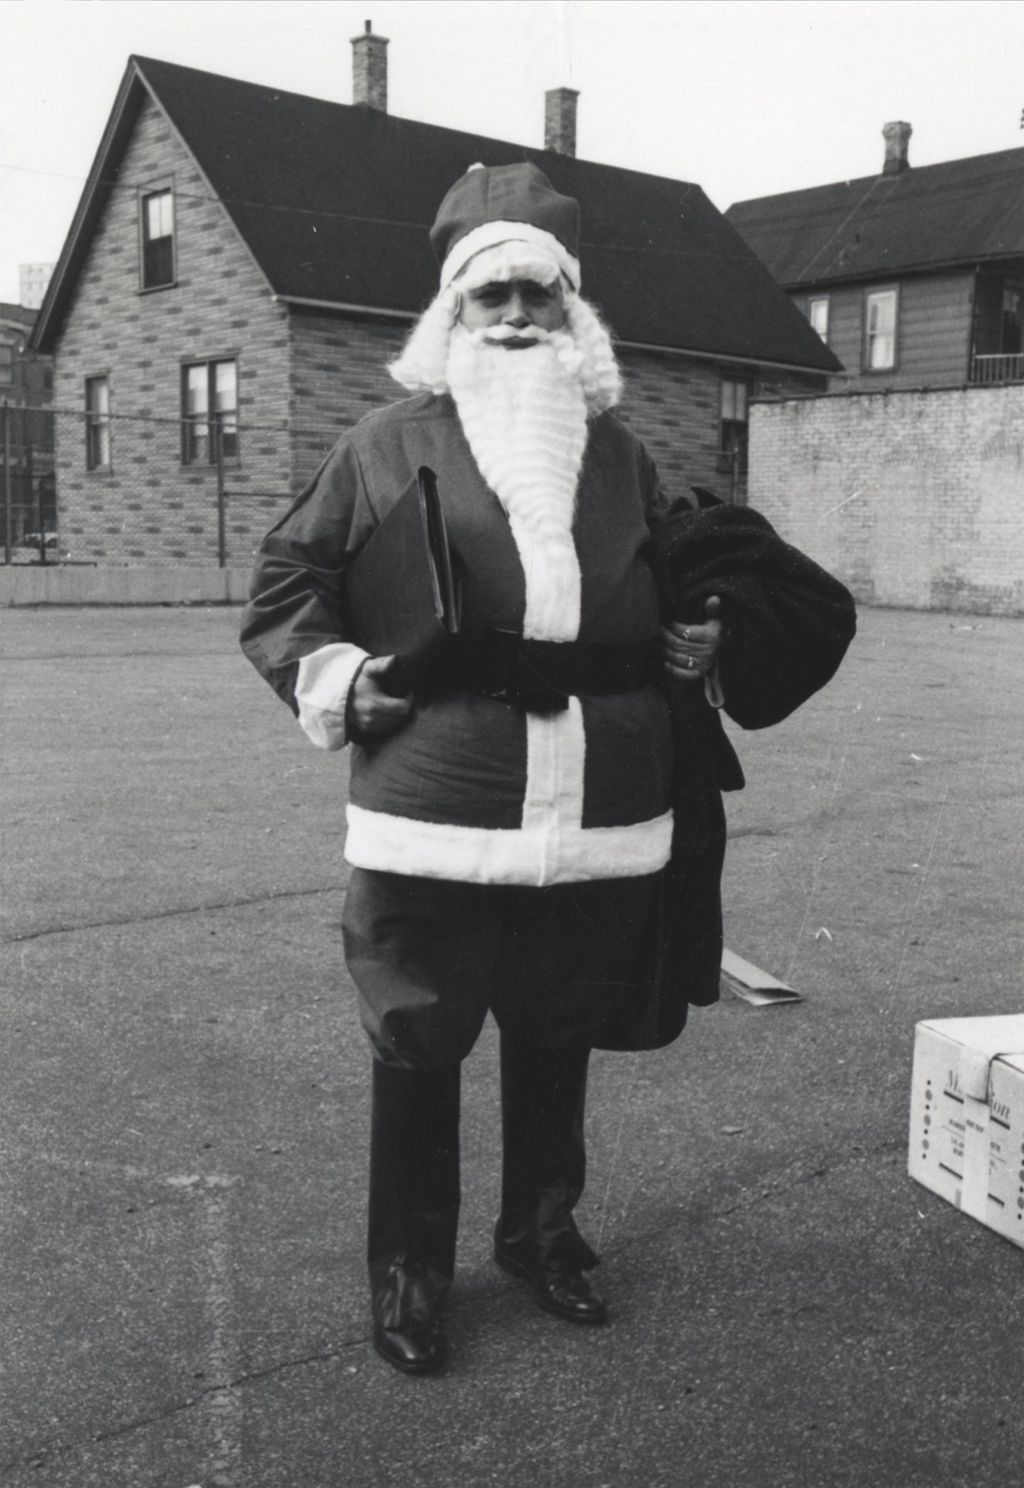 Miniature of Man in Santa Claus costume standing in an empty lot for a Hull-House Christmas toy giveaway